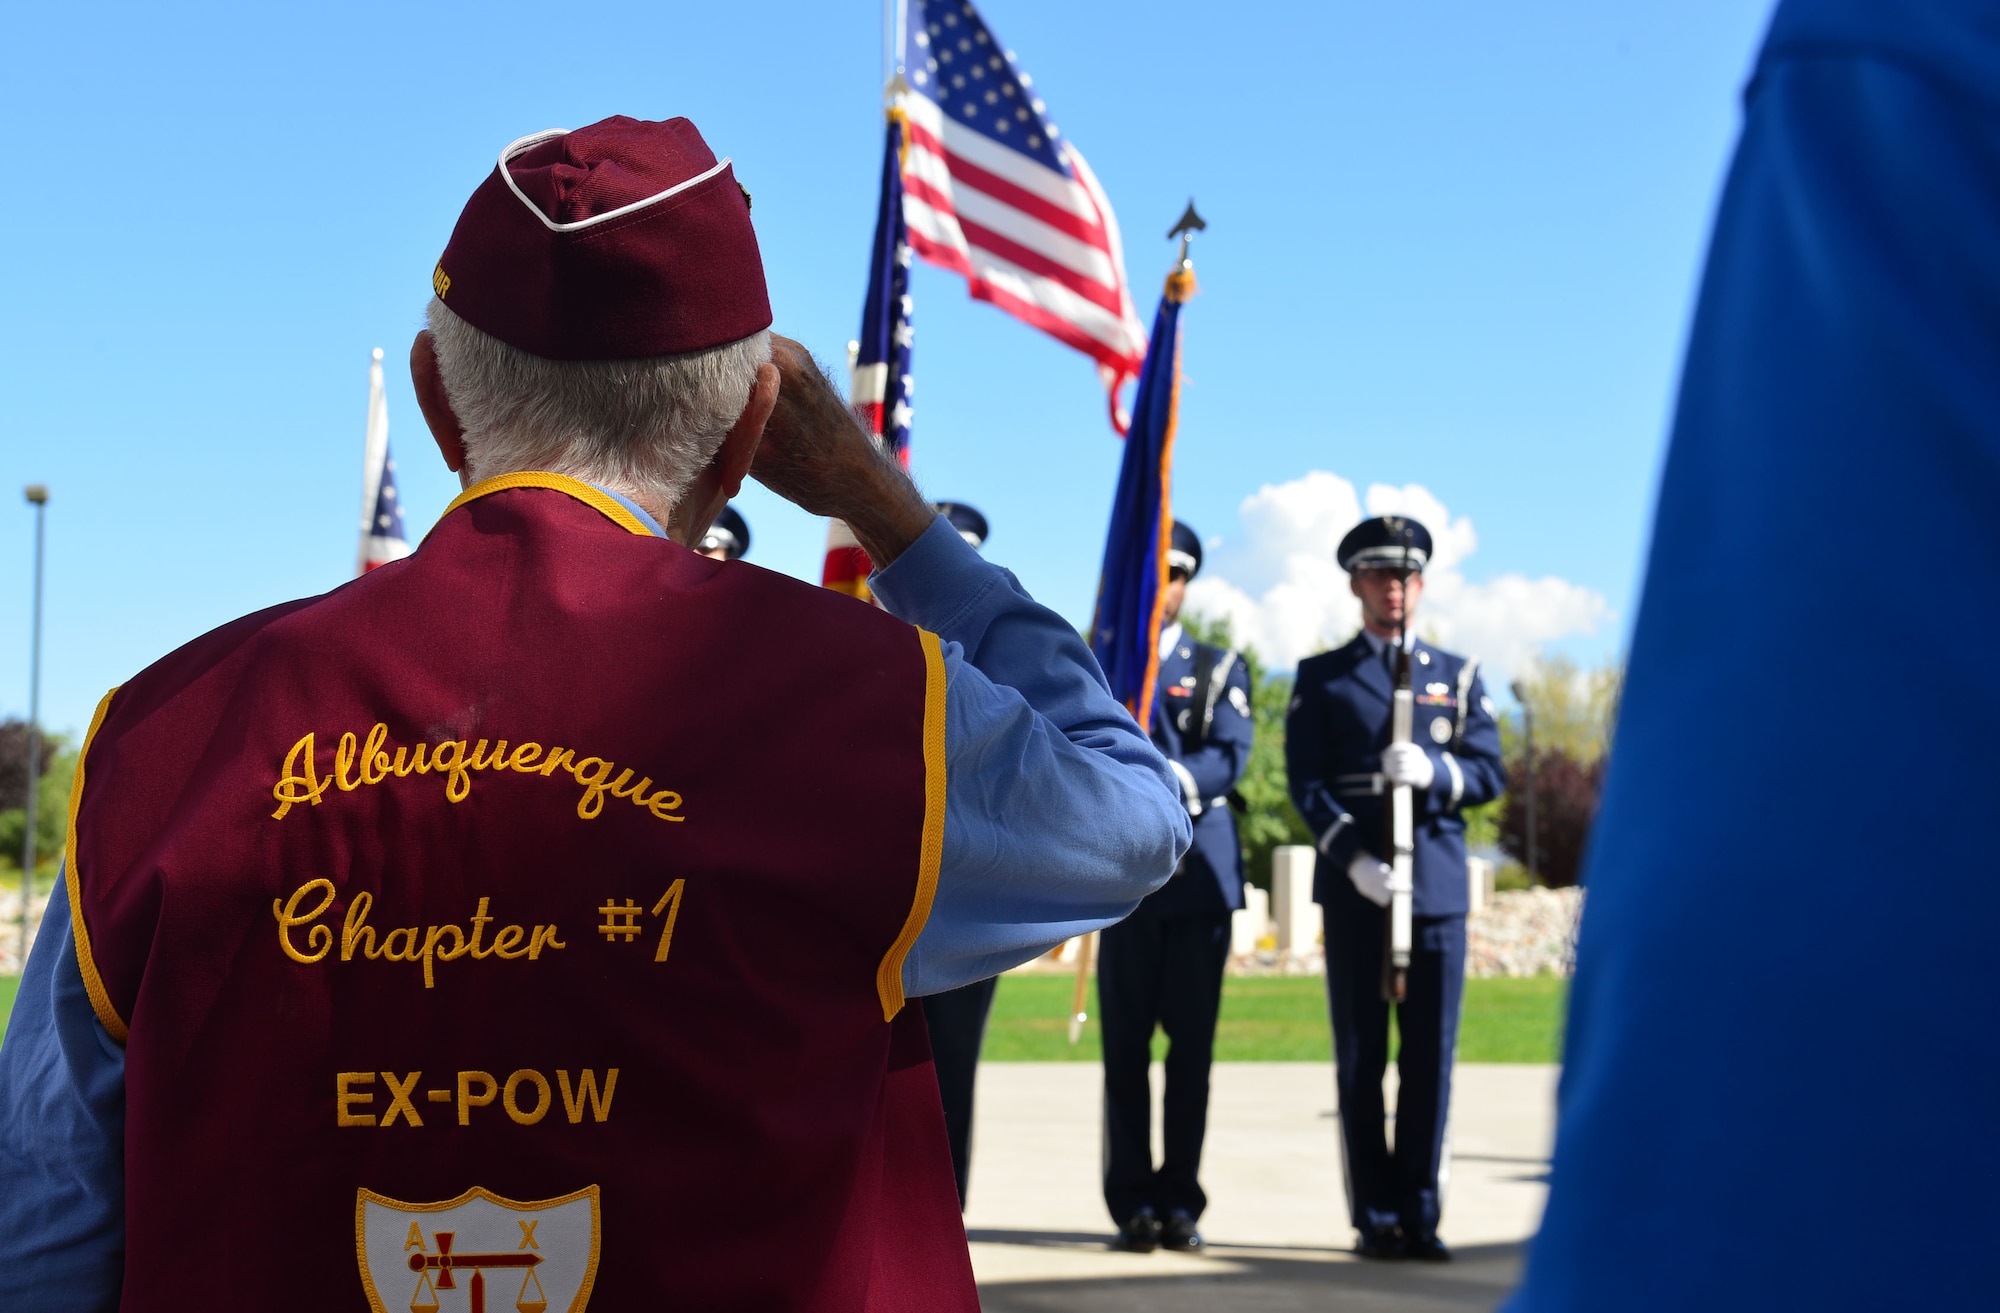 A former prisoner of war salutes during the national anthem at the POW/MIA ceremony in Albuquerque, N.M., Sept. 20, 2019. The ceremony was held at the New Mexico Veterans Memorial Park. (U.S. Air Force photo by Senior Airman Enrique Barceló)